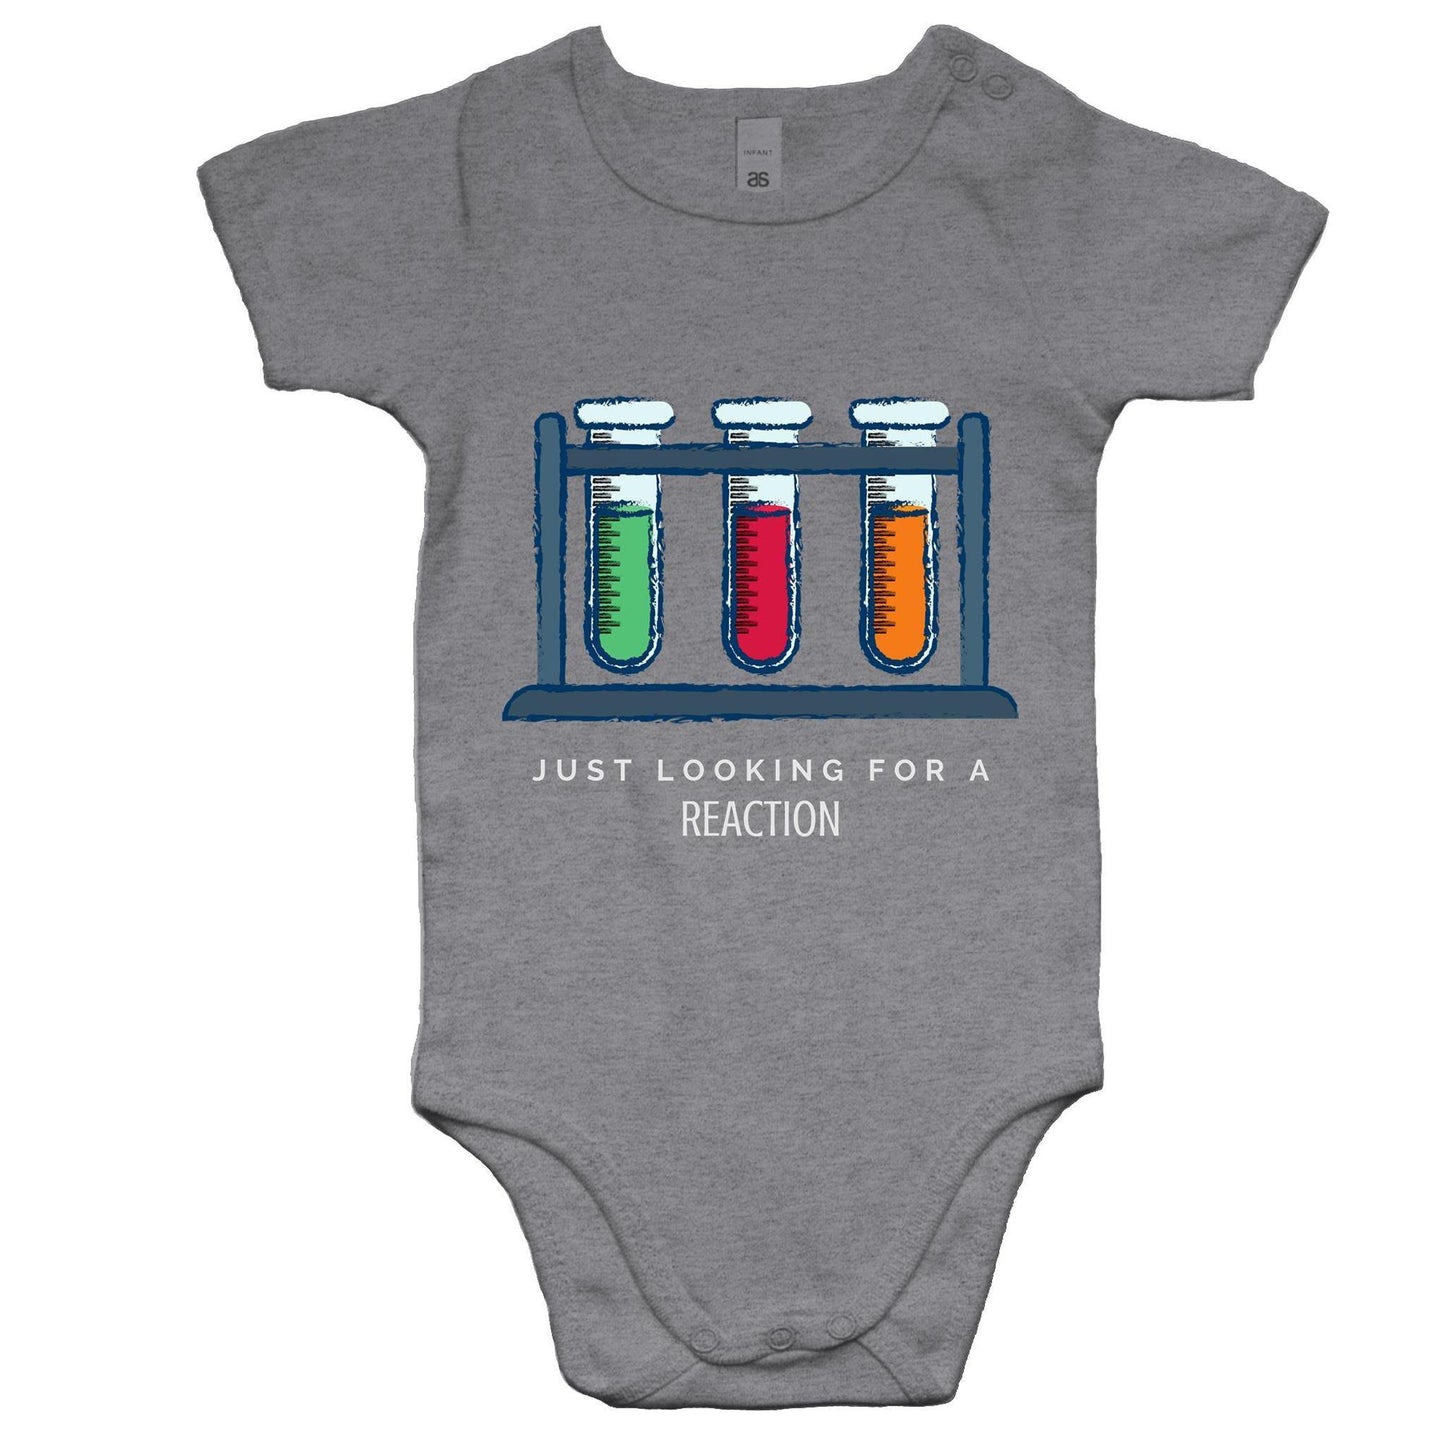 Test Tube, Just Looking For A Reaction - Baby Bodysuit Grey Marle Baby Bodysuit kids Science